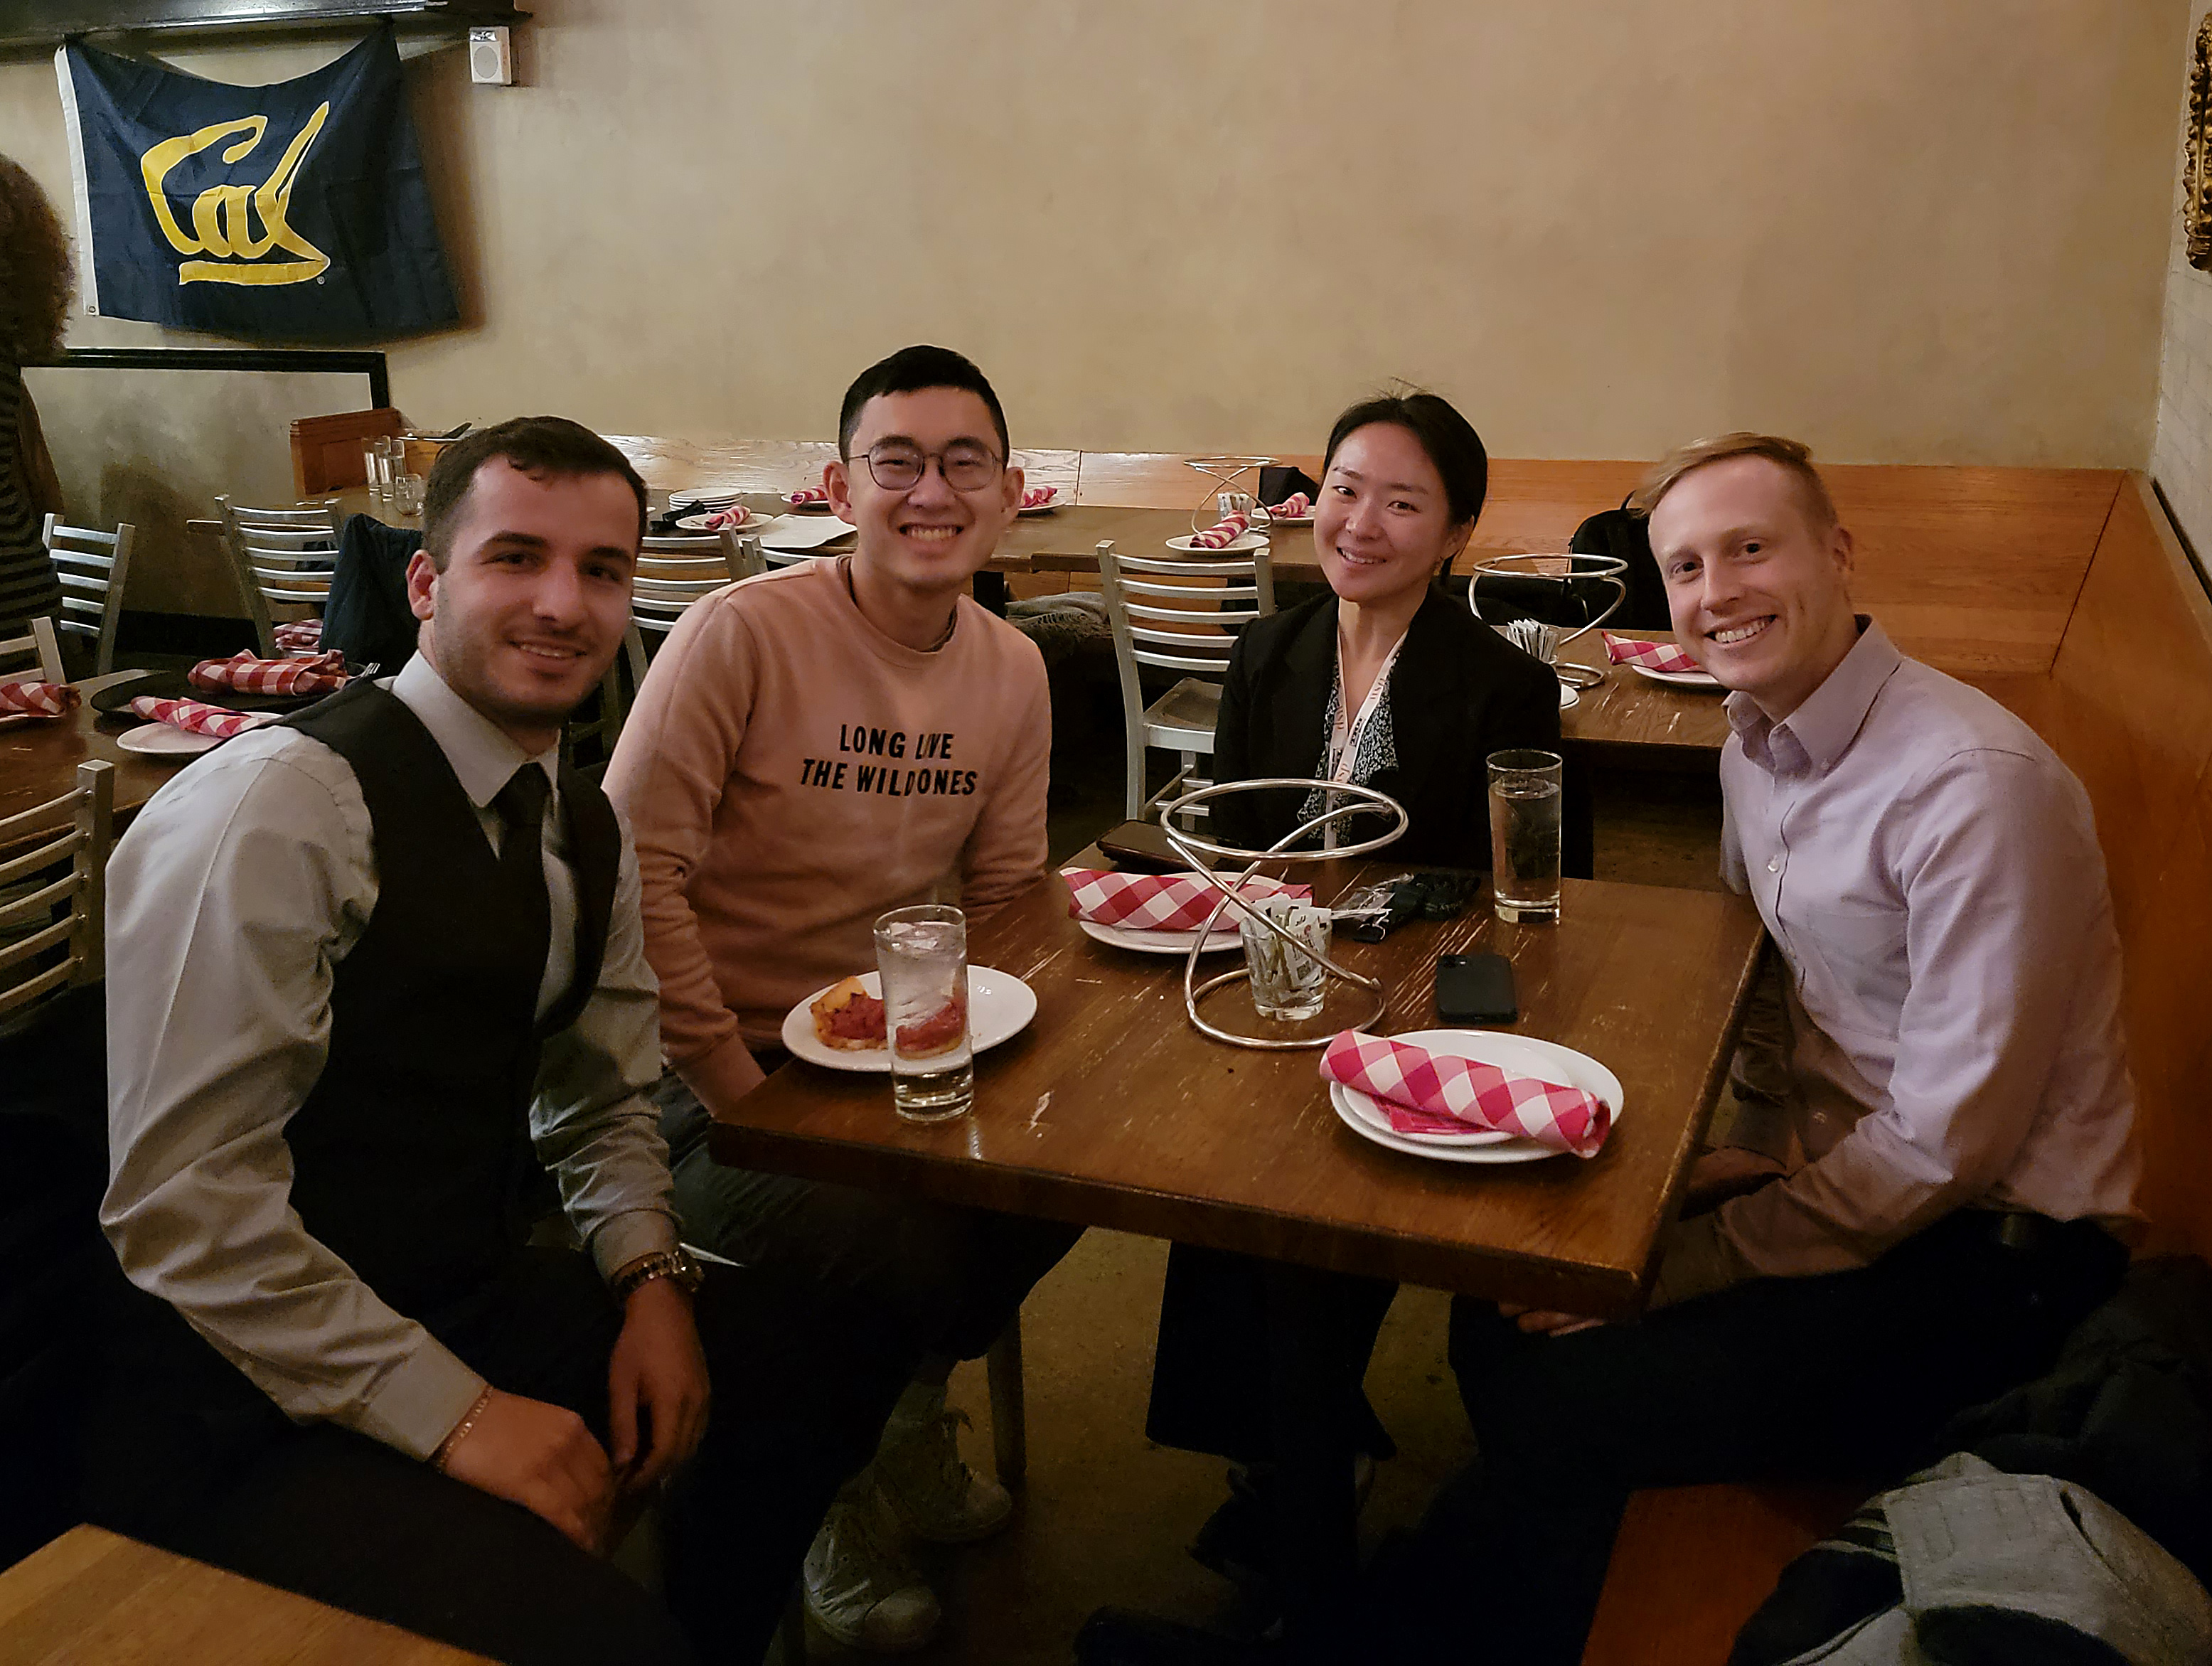 We had the opportunity to meet with members of the Washington DC UC Berkeley alumni group and made some new friends!